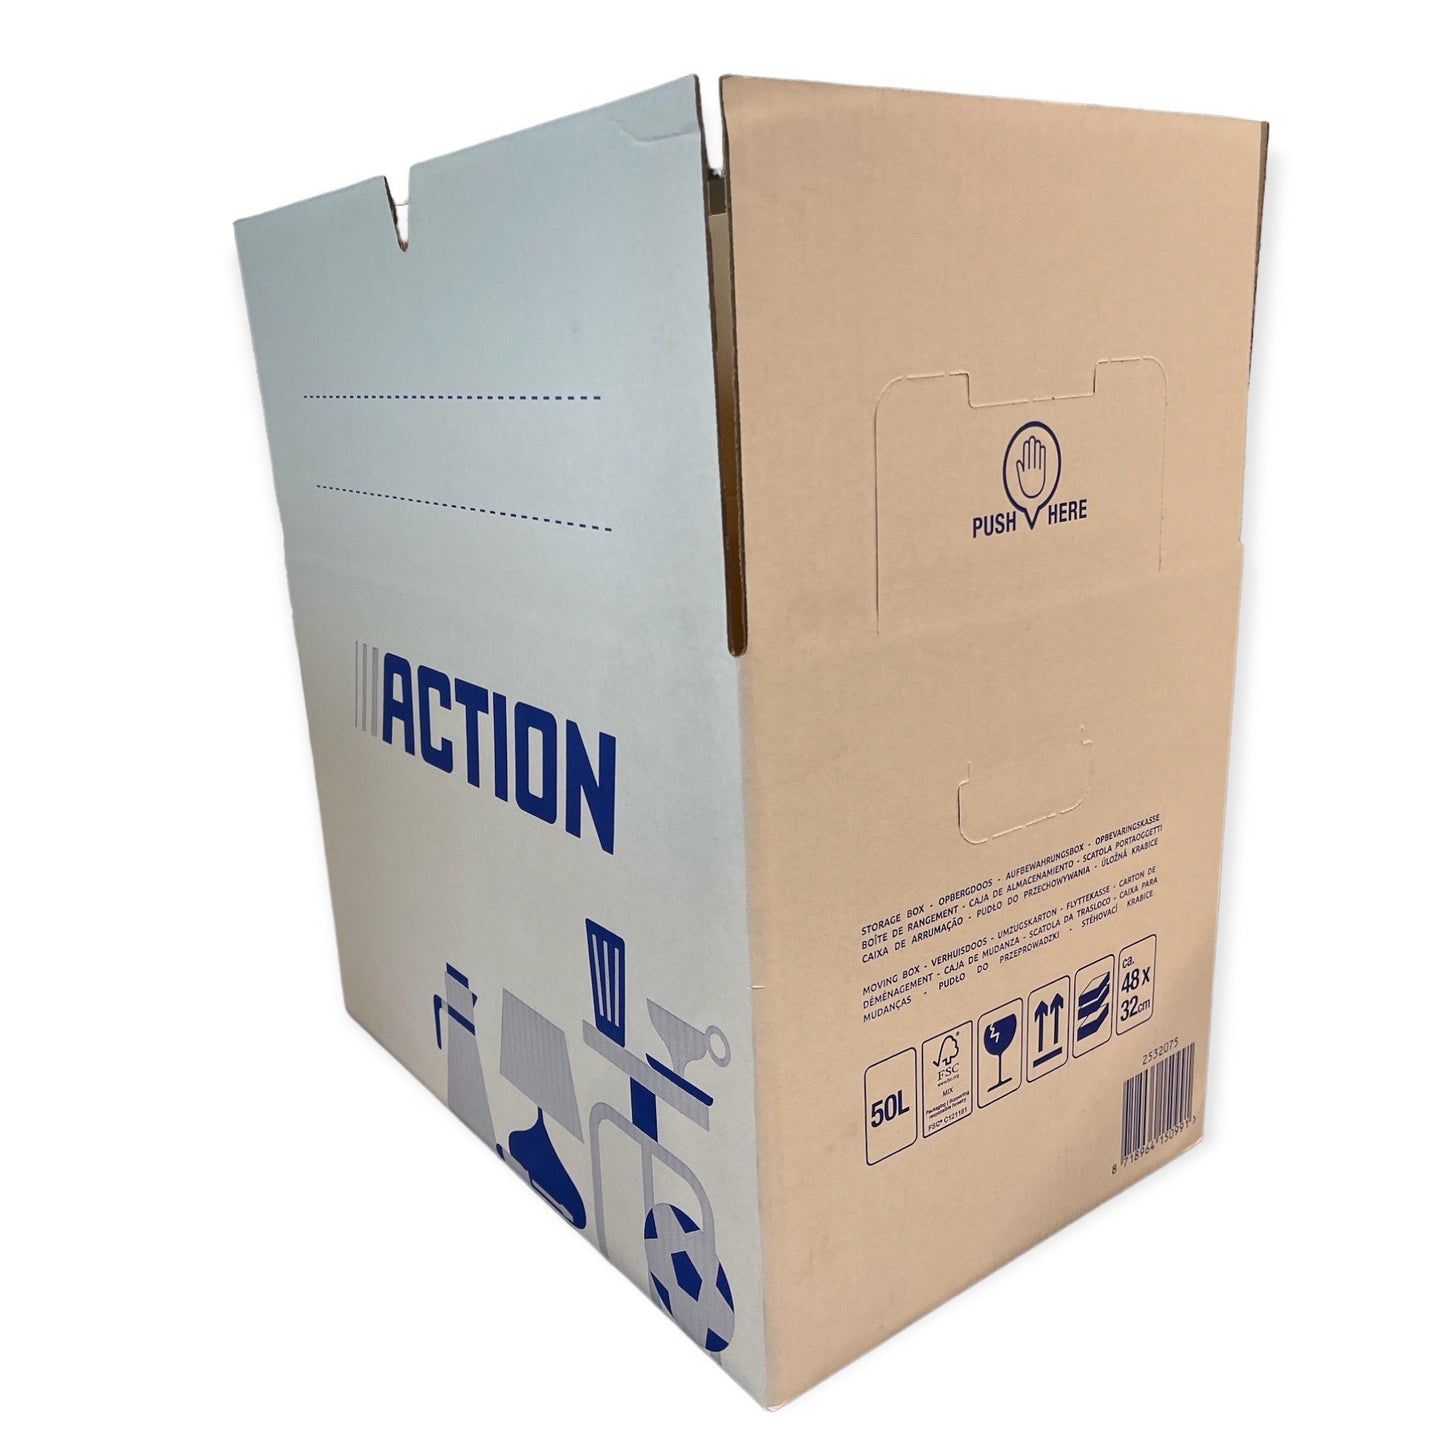 Timmy Toys - VD015 - Action Moving Box - 480x430x330mm - 50 Liter - 1 Piece